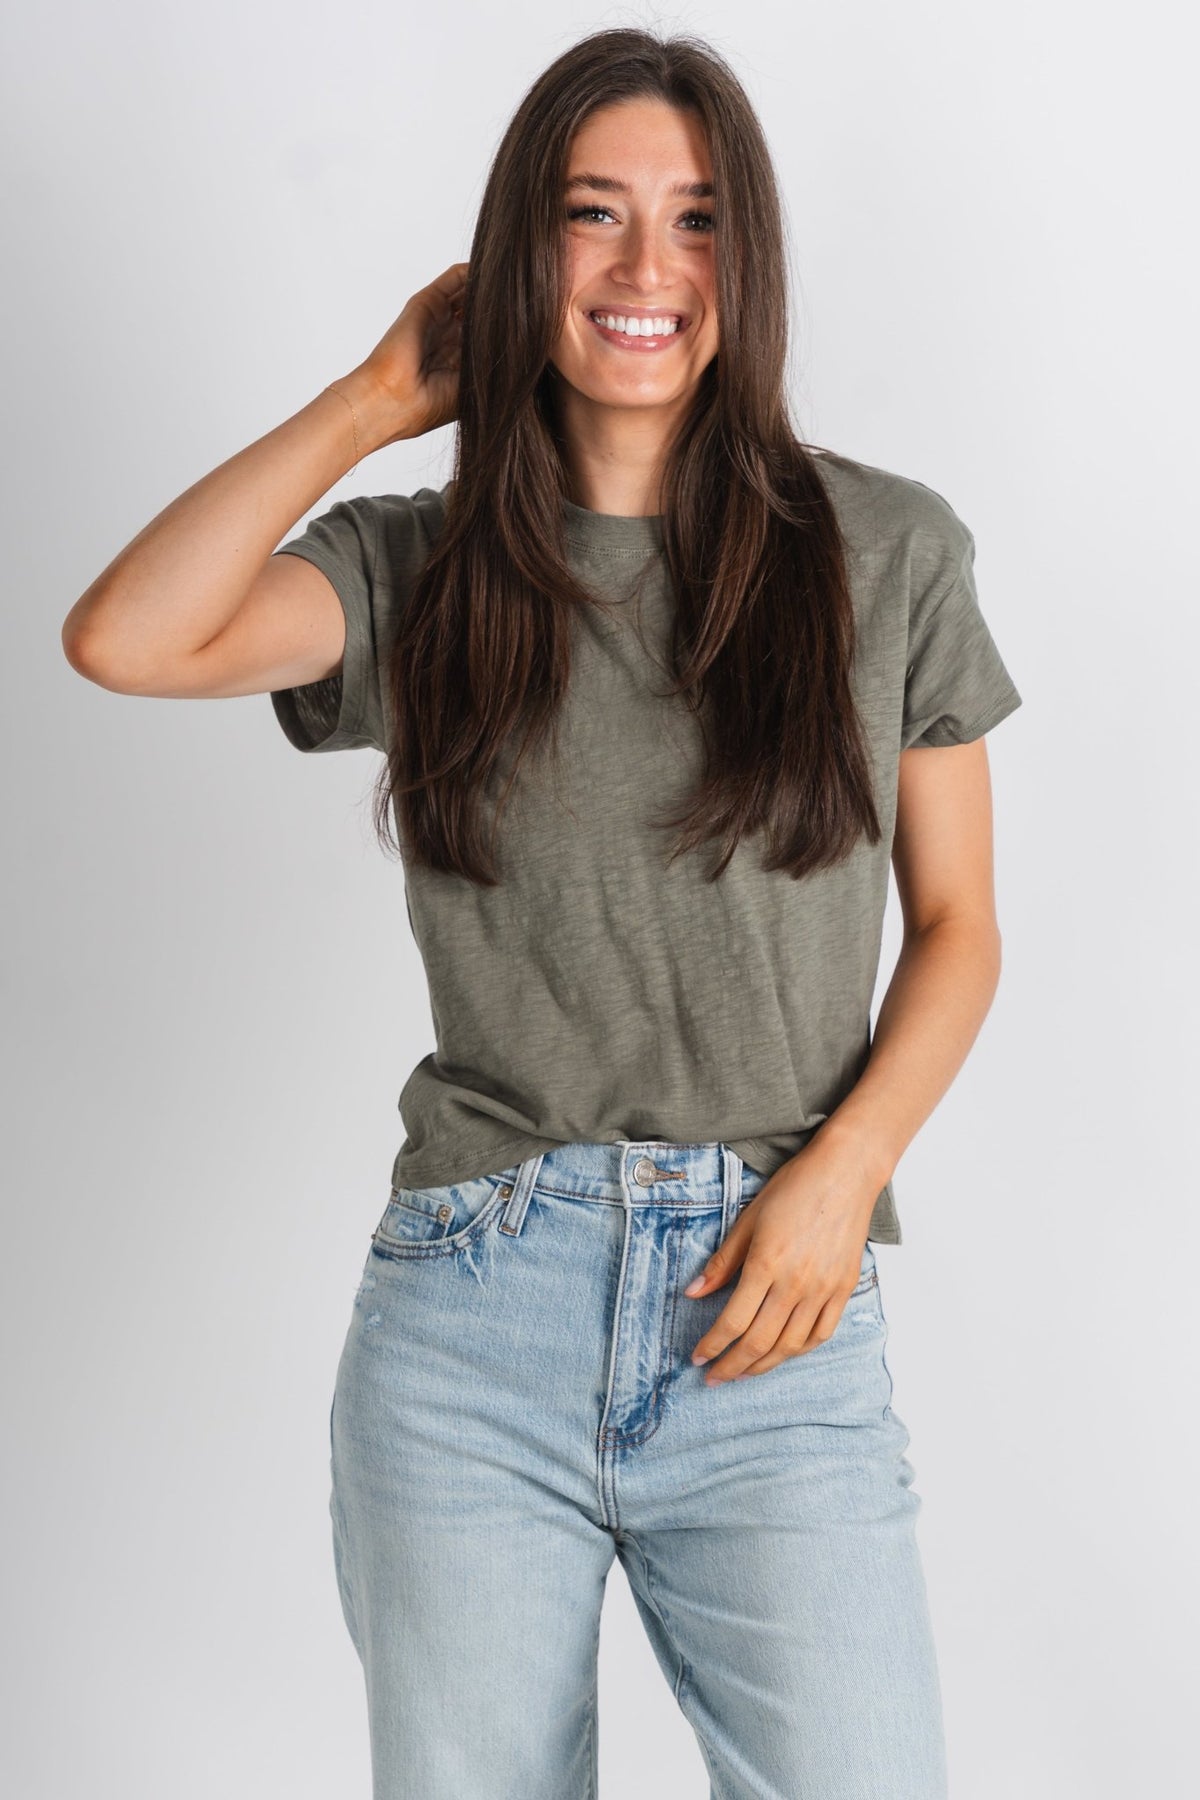 Z Supply modern slub tee evergreen - Z Supply T-shirts - Z Supply Tops, Dresses, Tanks, Tees, Cardigans, Joggers and Loungewear at Lush Fashion Lounge